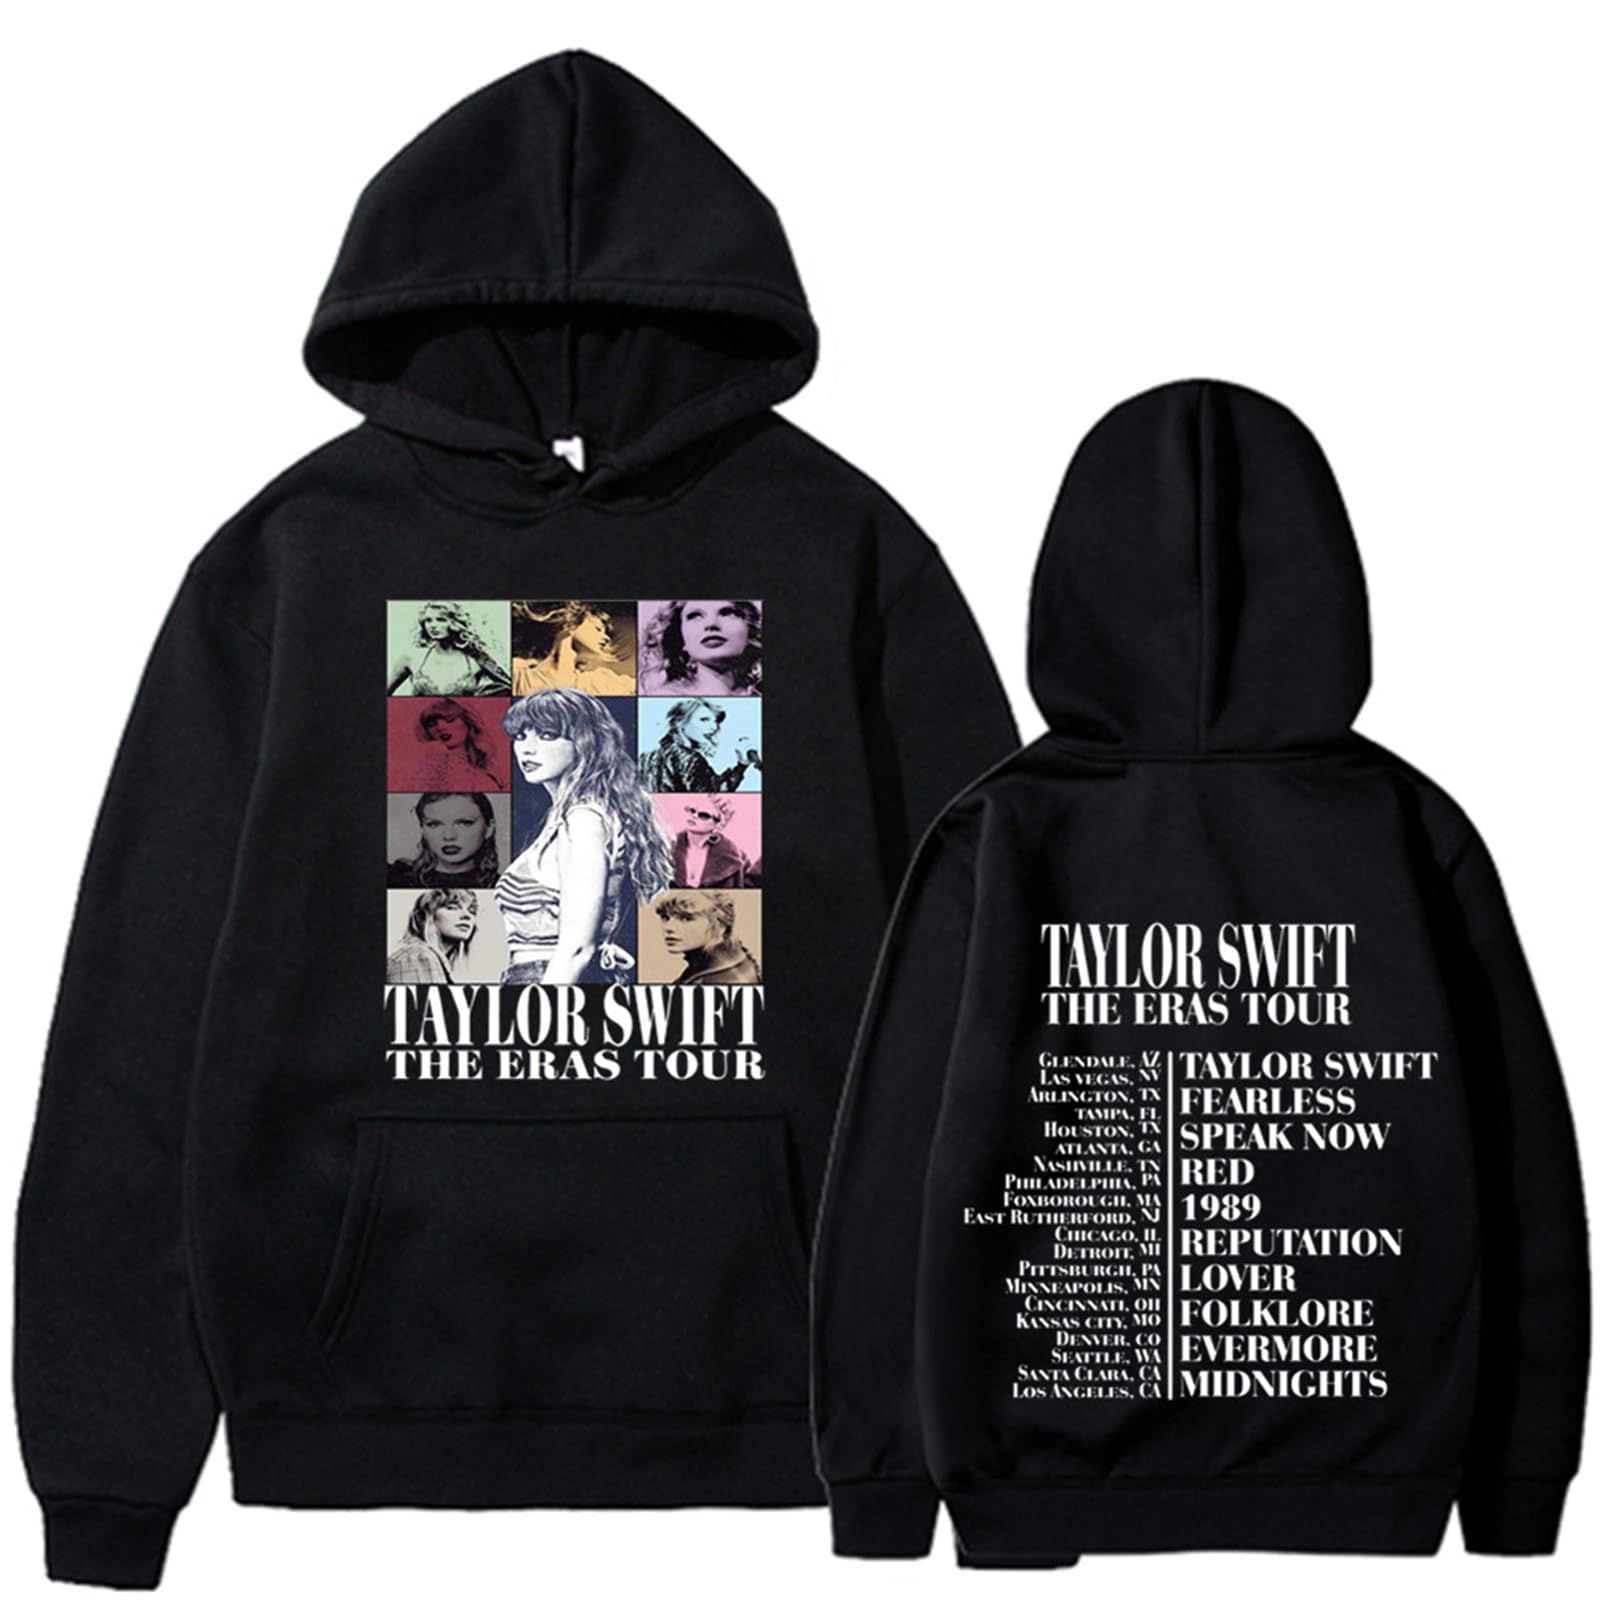 The Best Taylor Swift Merch You Can Get on